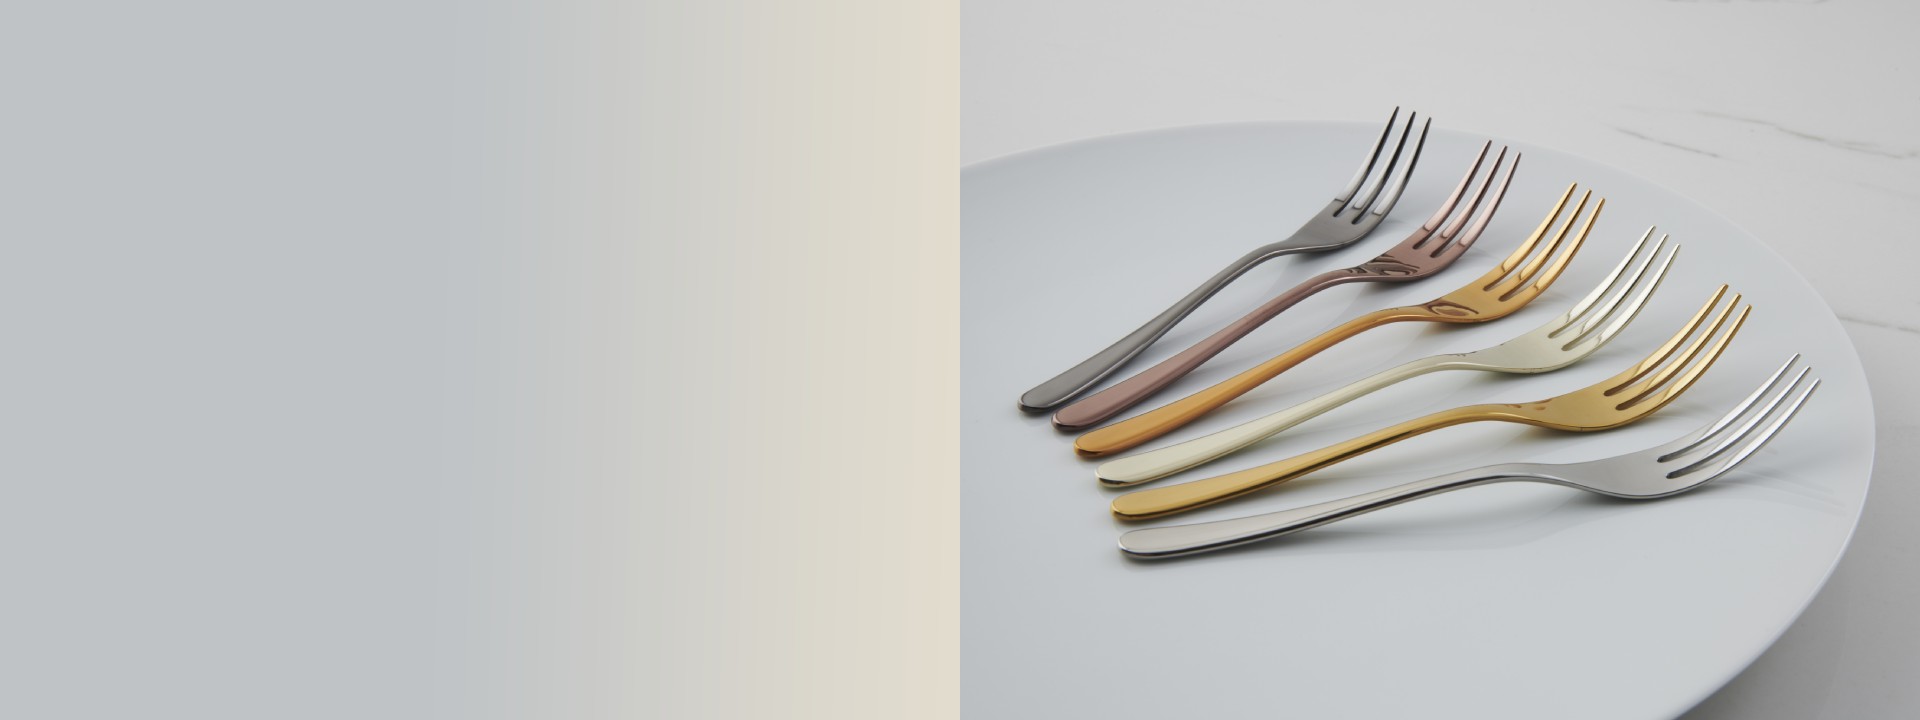 Cutlery by colour